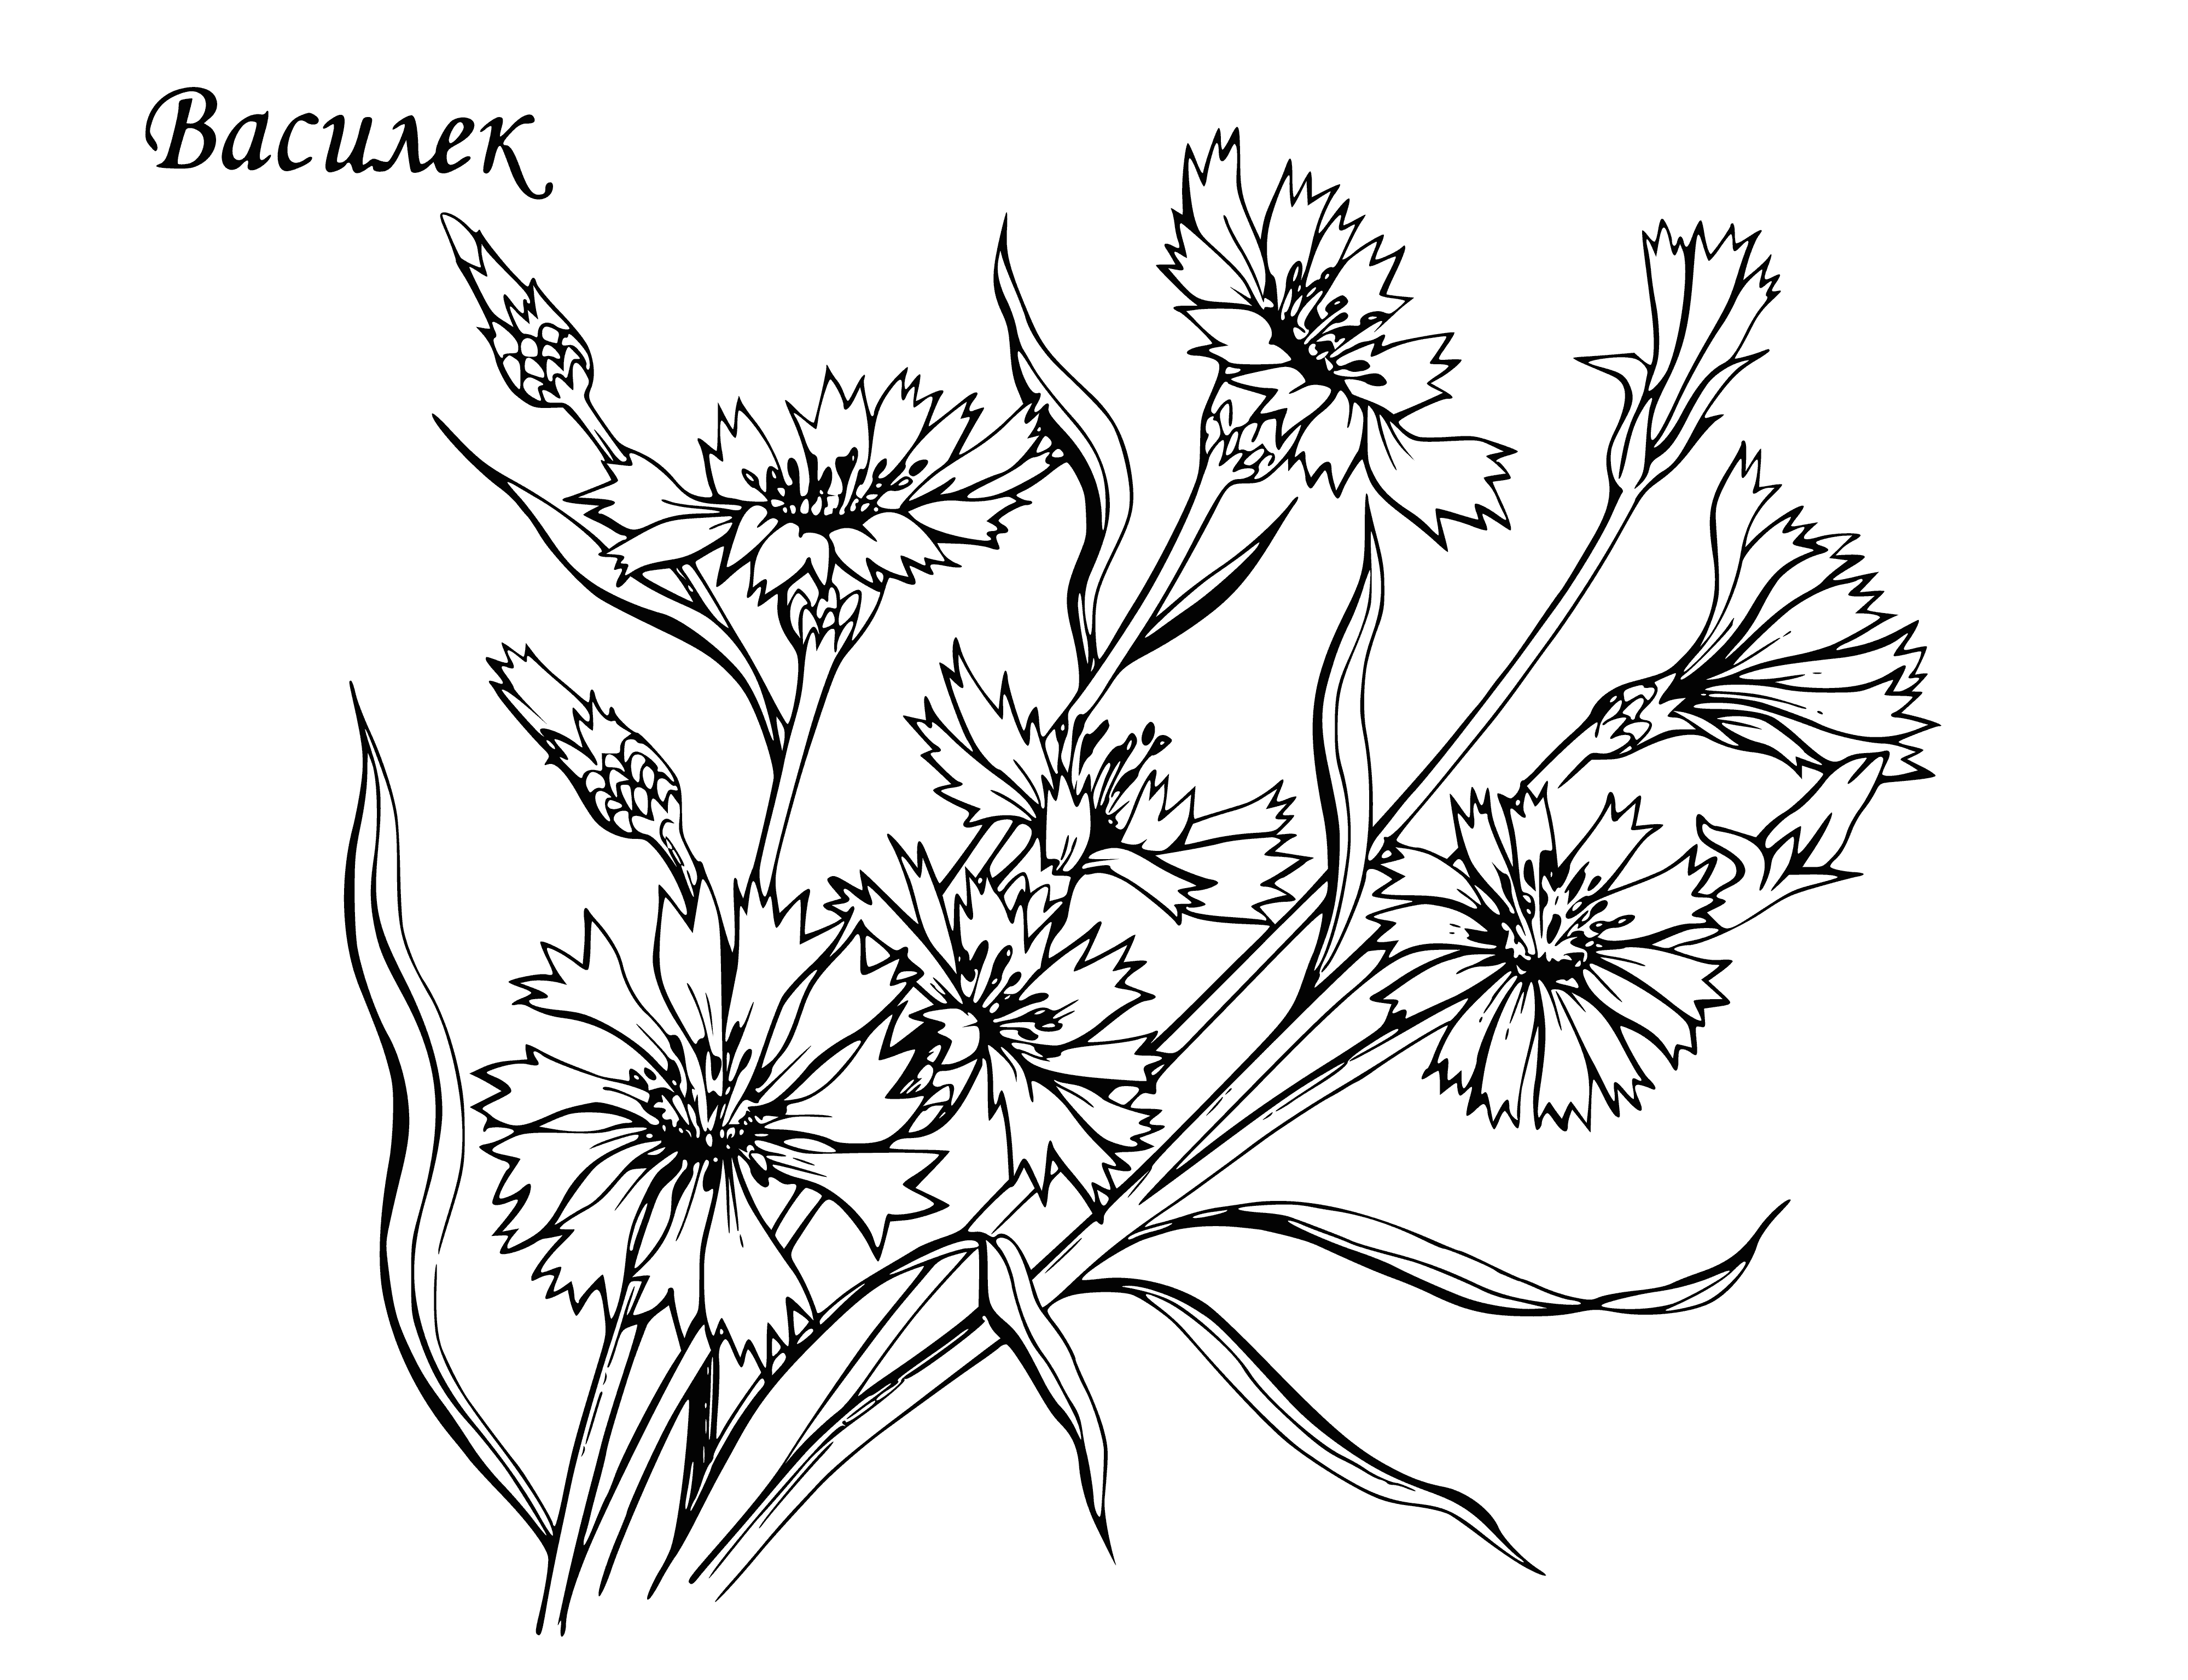 coloring page: A light blue flower with a yellow center, petals slightly curved & pointy. Green leaves around & light green bg. #coloringpage